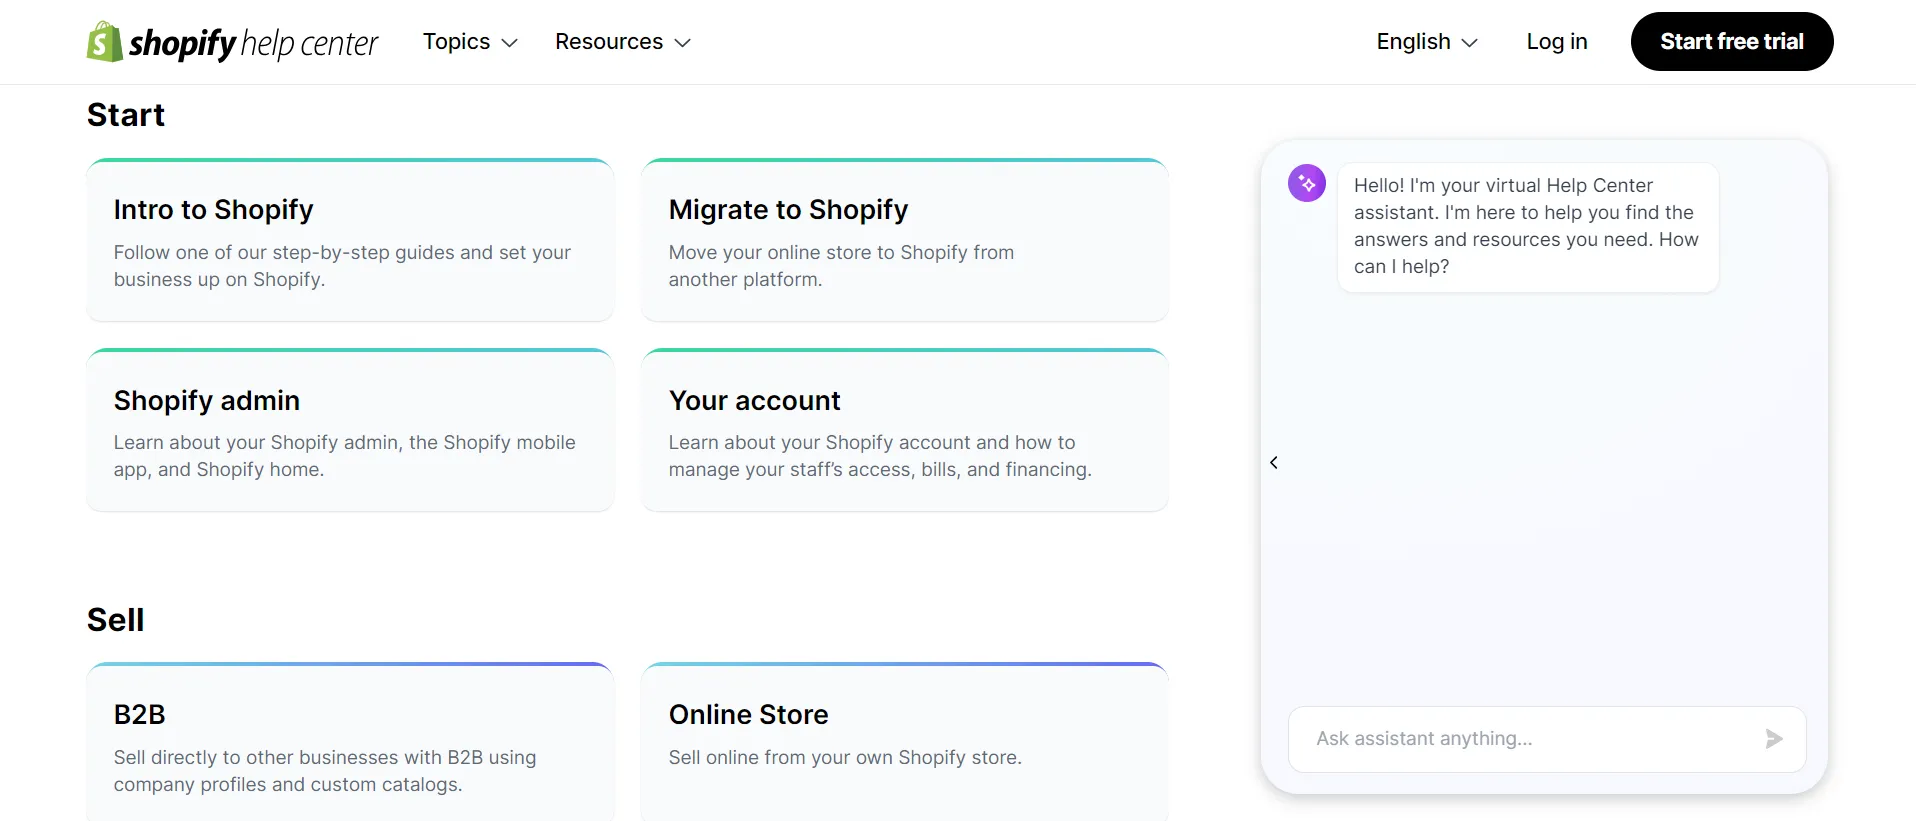 Shopify help center with live chat